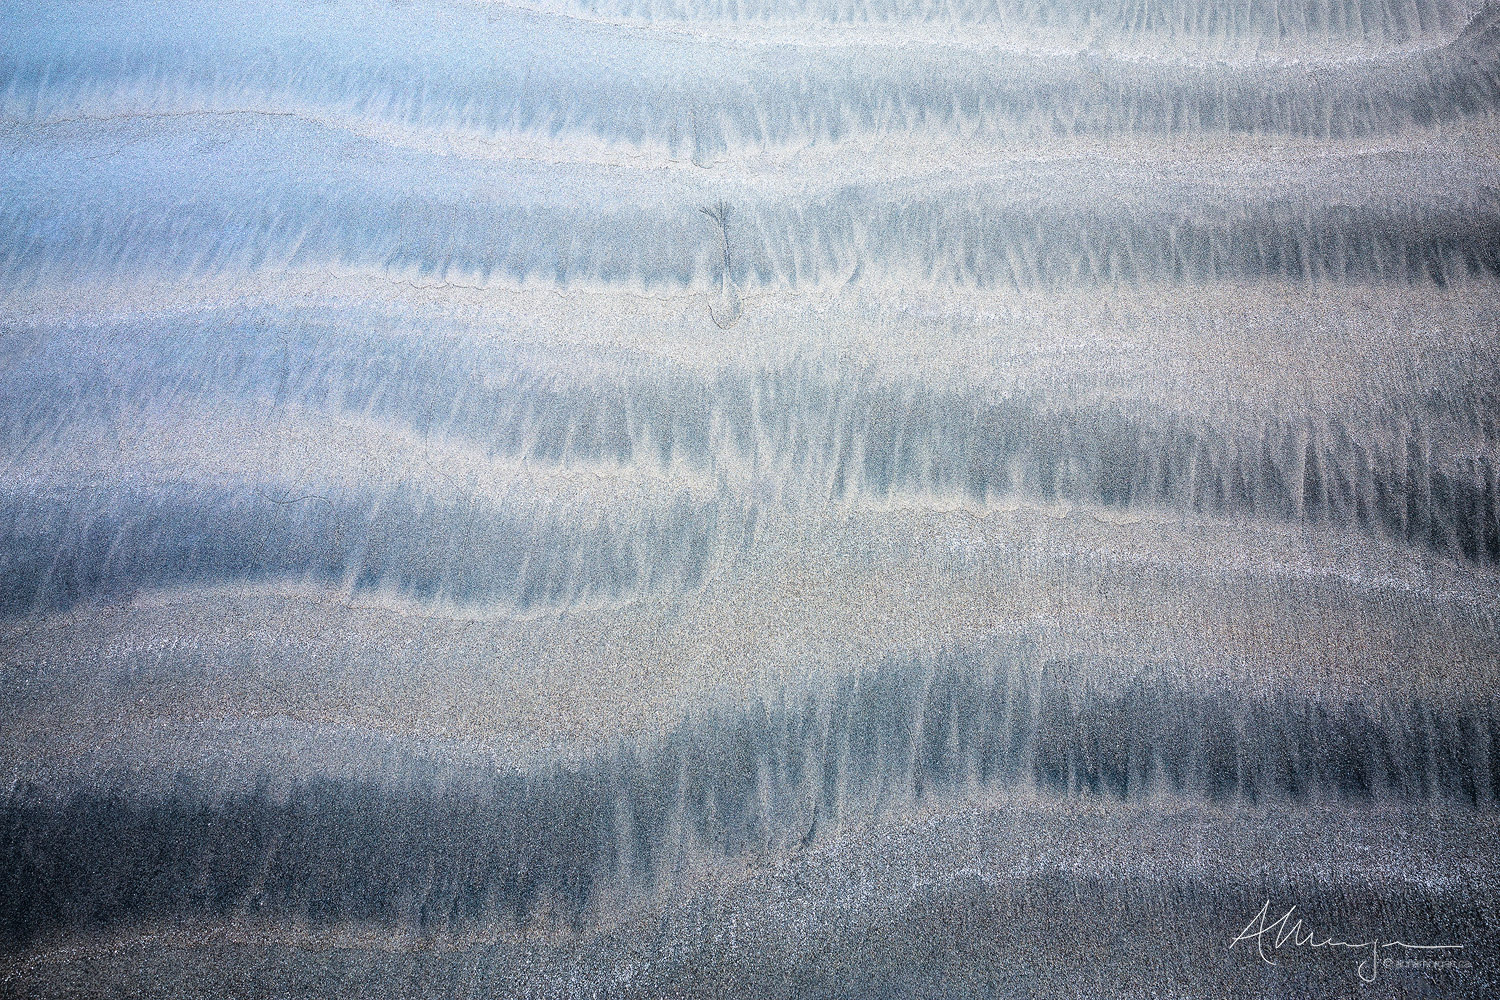 One lone tree pattern grounded on the beach amongst other patterns of darker and lighter sand in Tofino, British Columbia